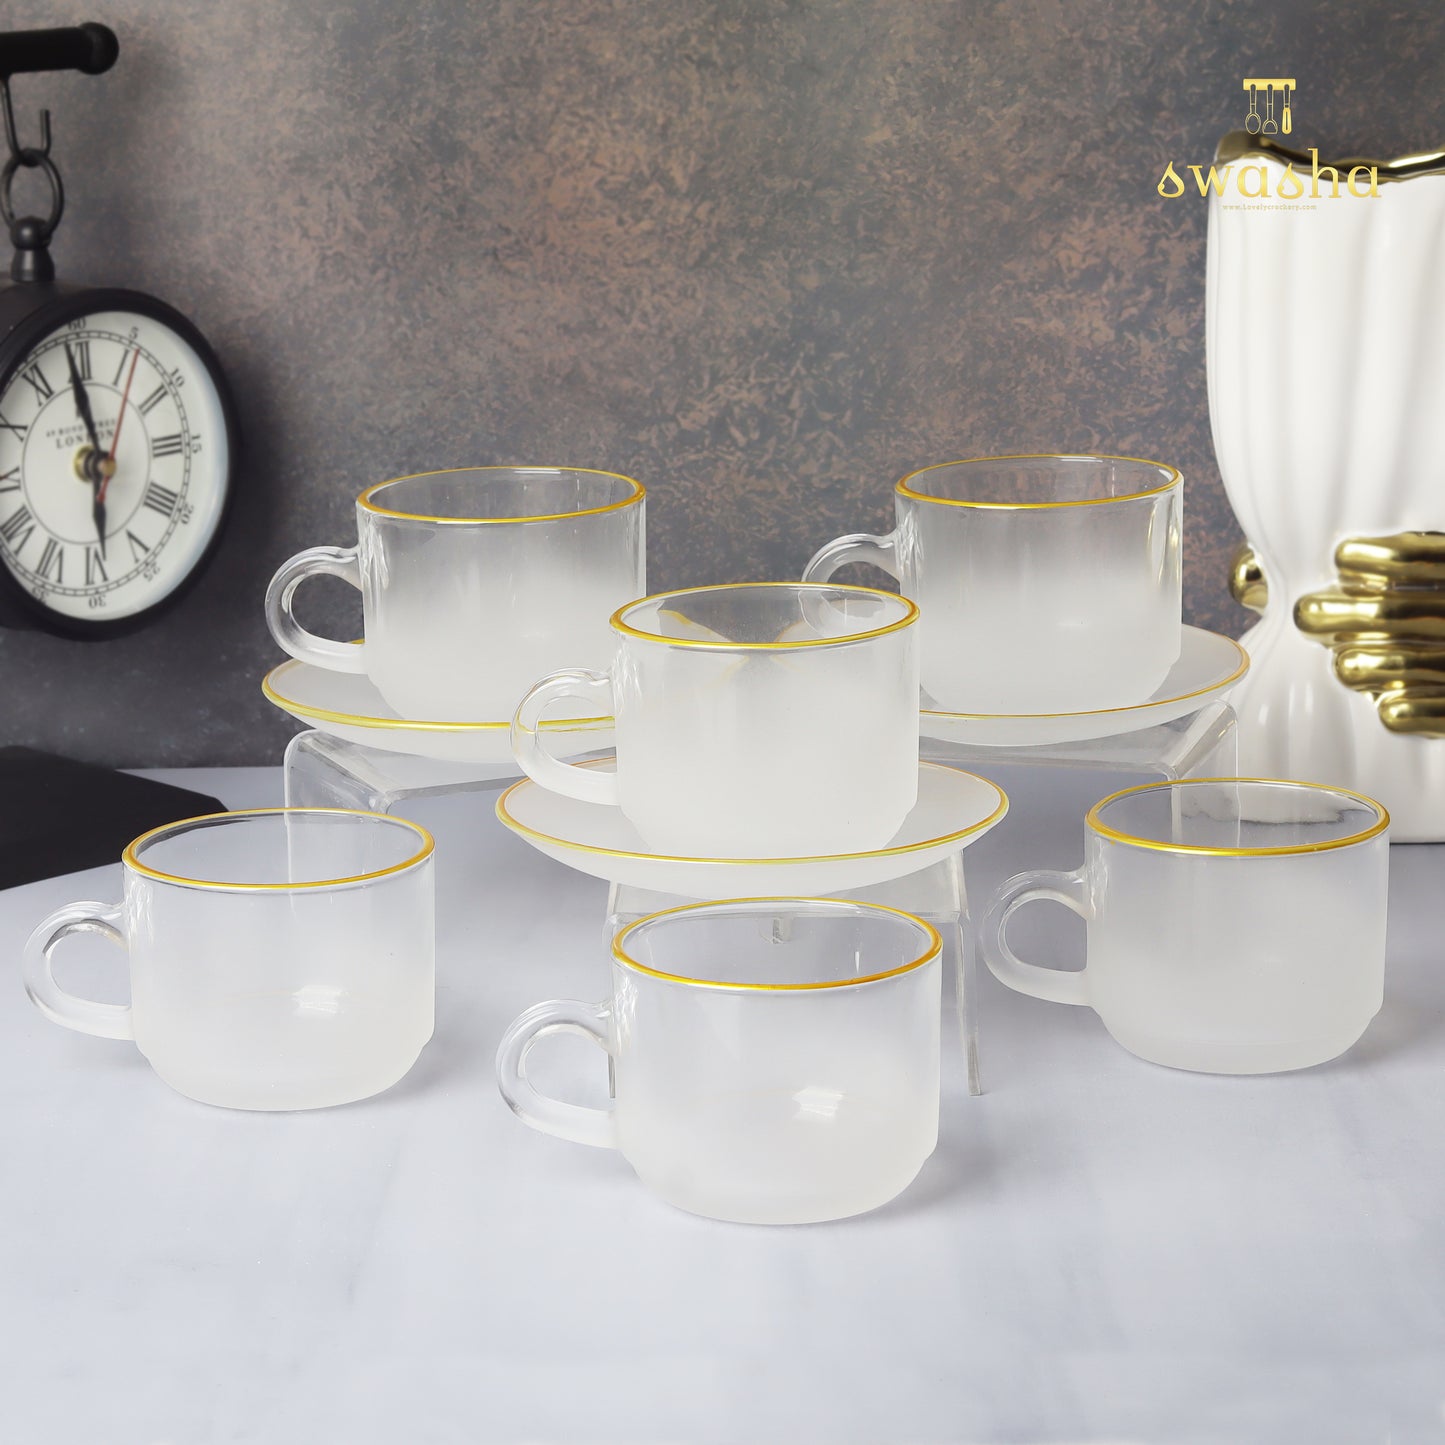 Set of 6 elegant cup and saucer pairs - perfect for refined tea or coffee moments